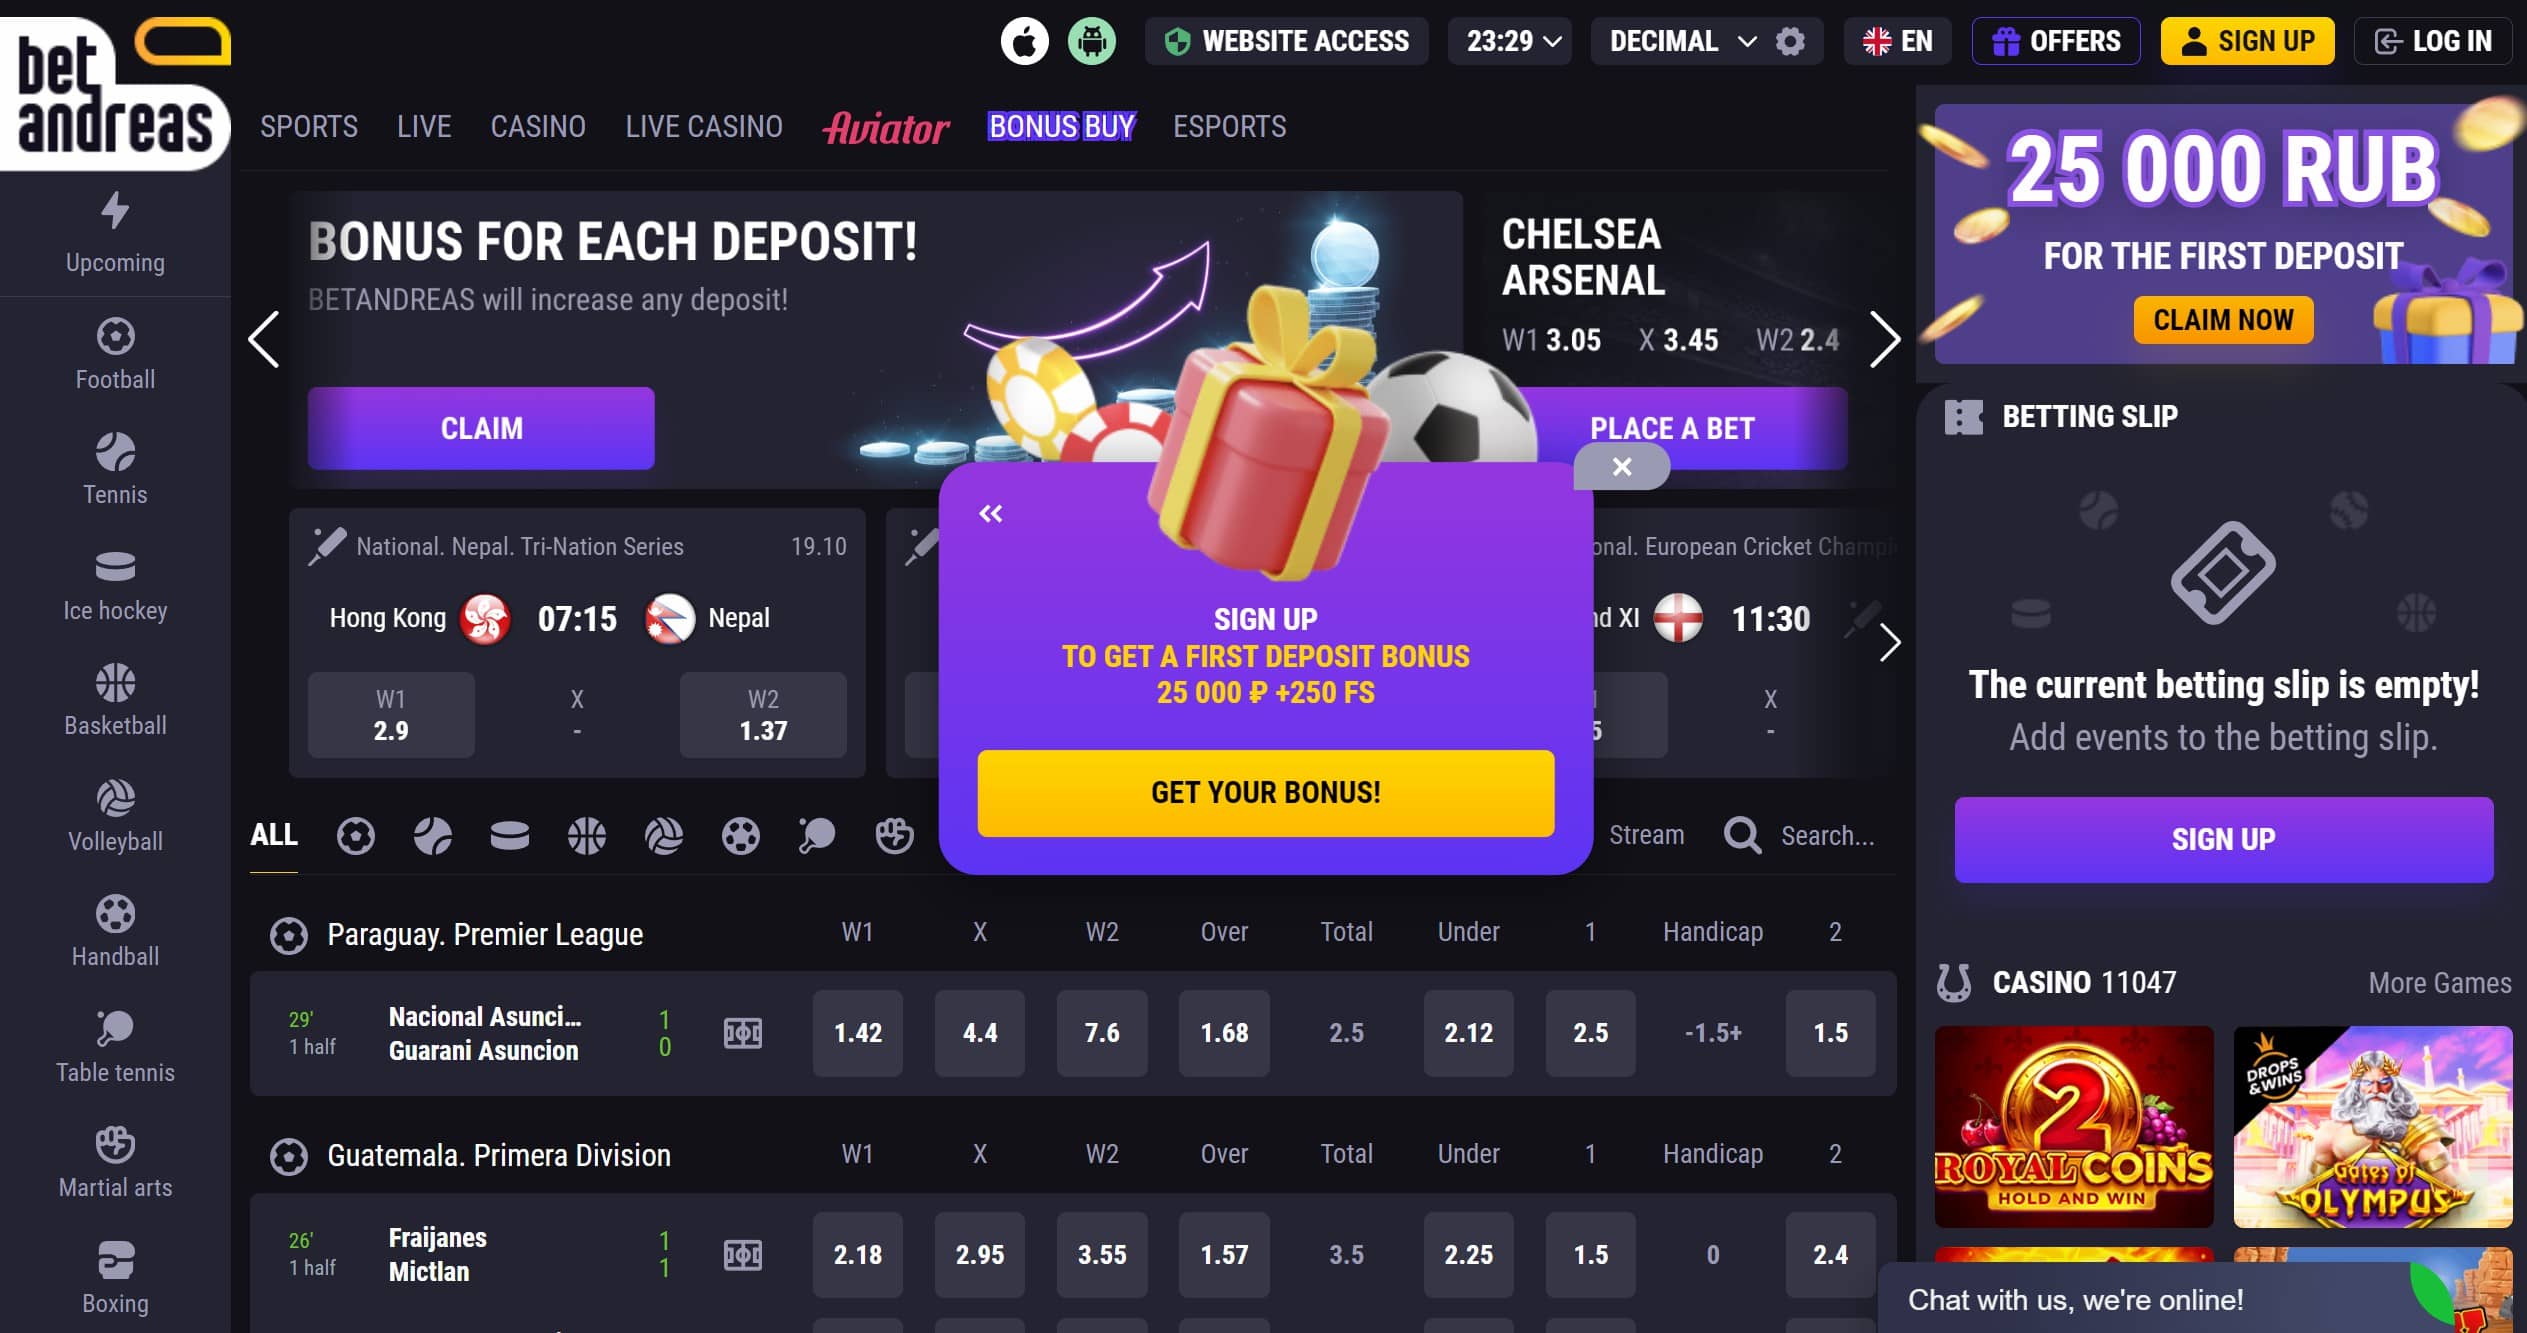 the main page of the gambling service